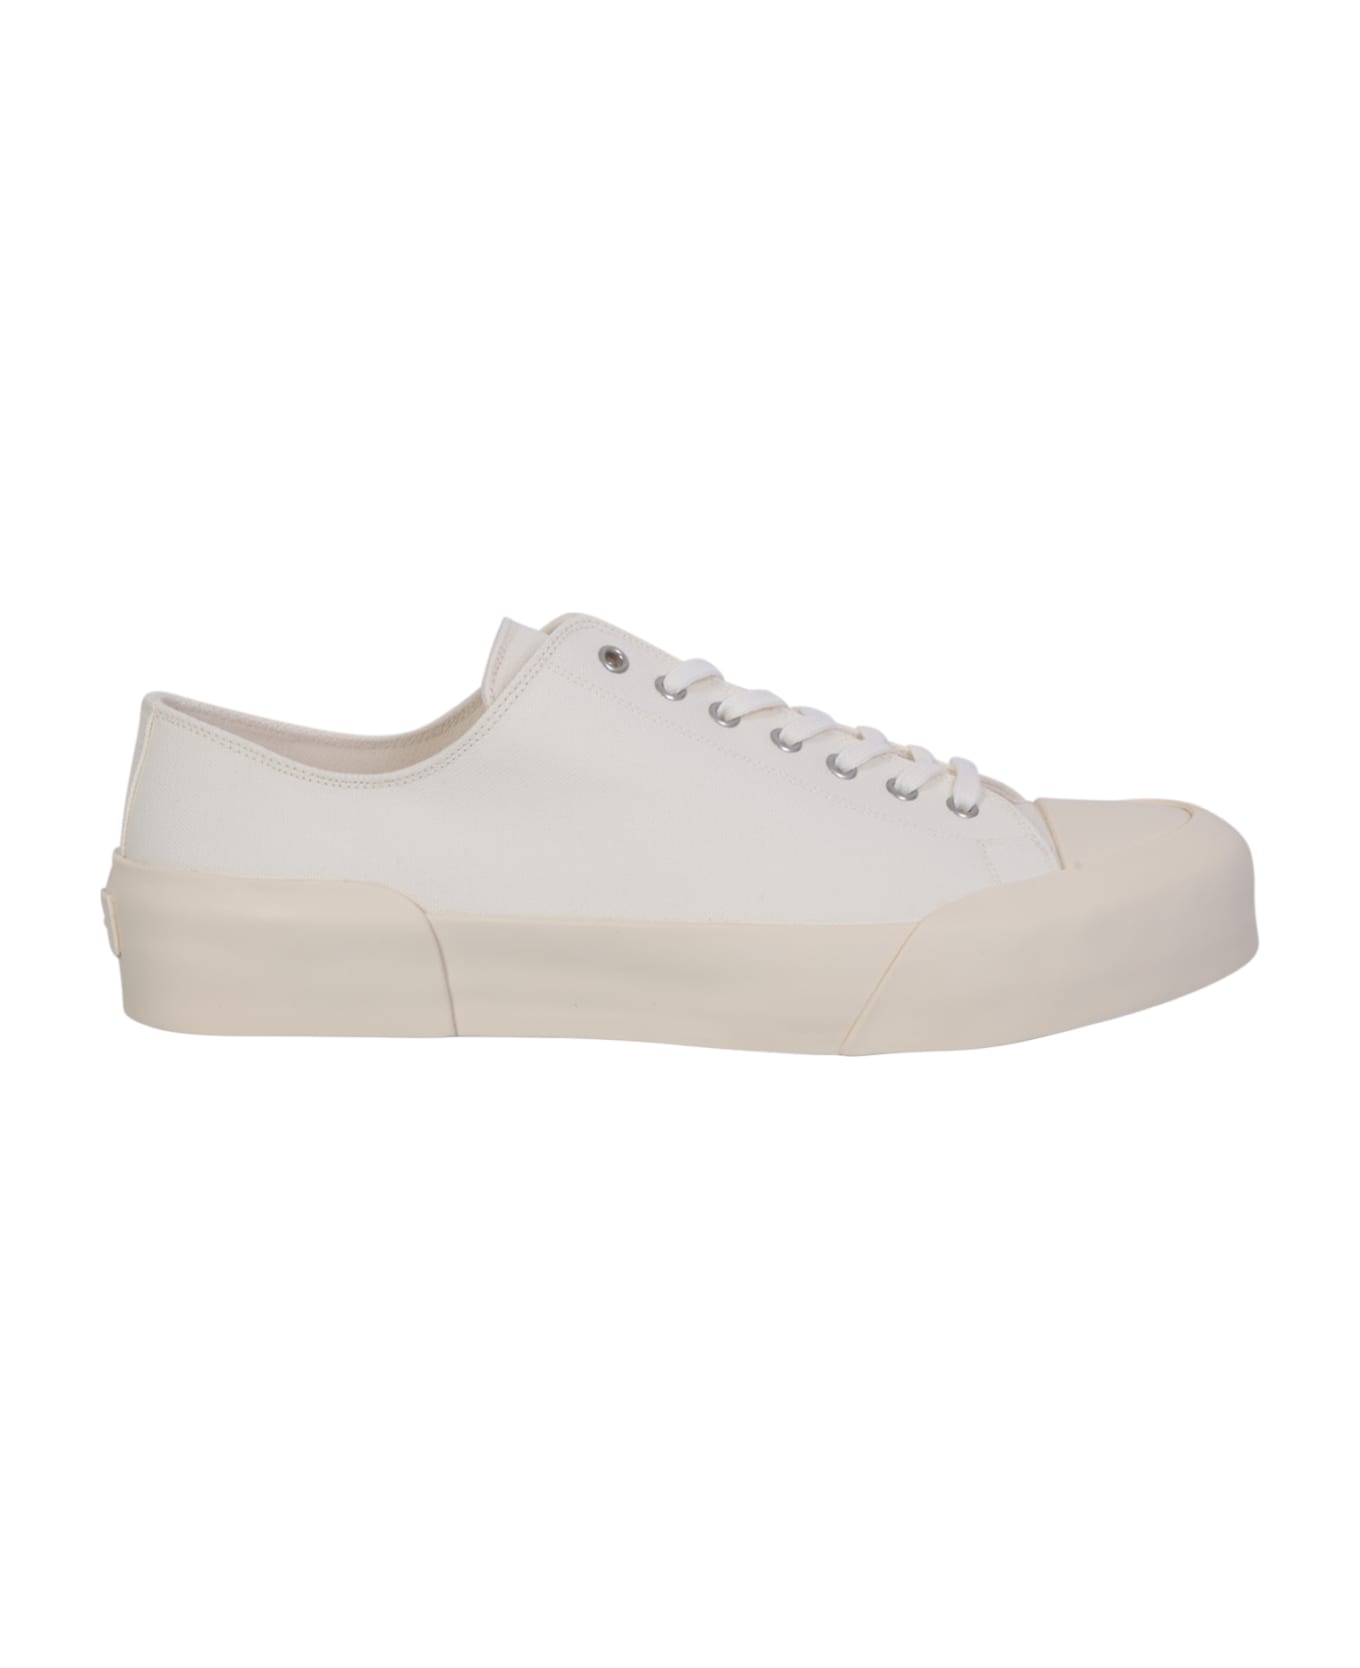 Jil Sander White Lace-up Low Top Sneakers - NATURAL スニーカー